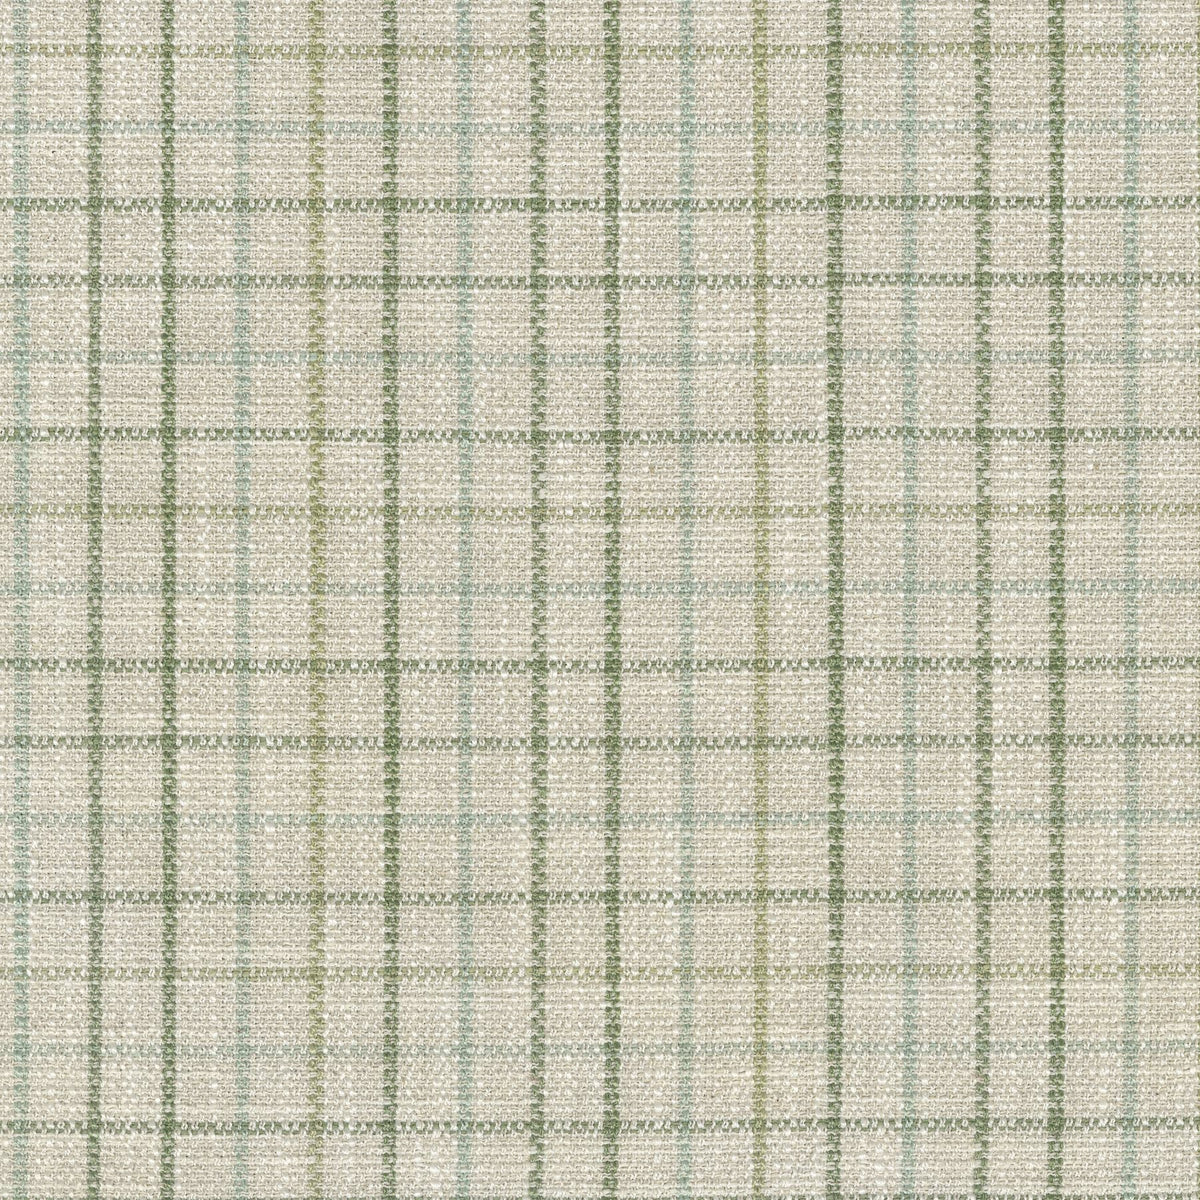 P/K Lifestyles Keep In Check - Spring 411582 Fabric Swatch